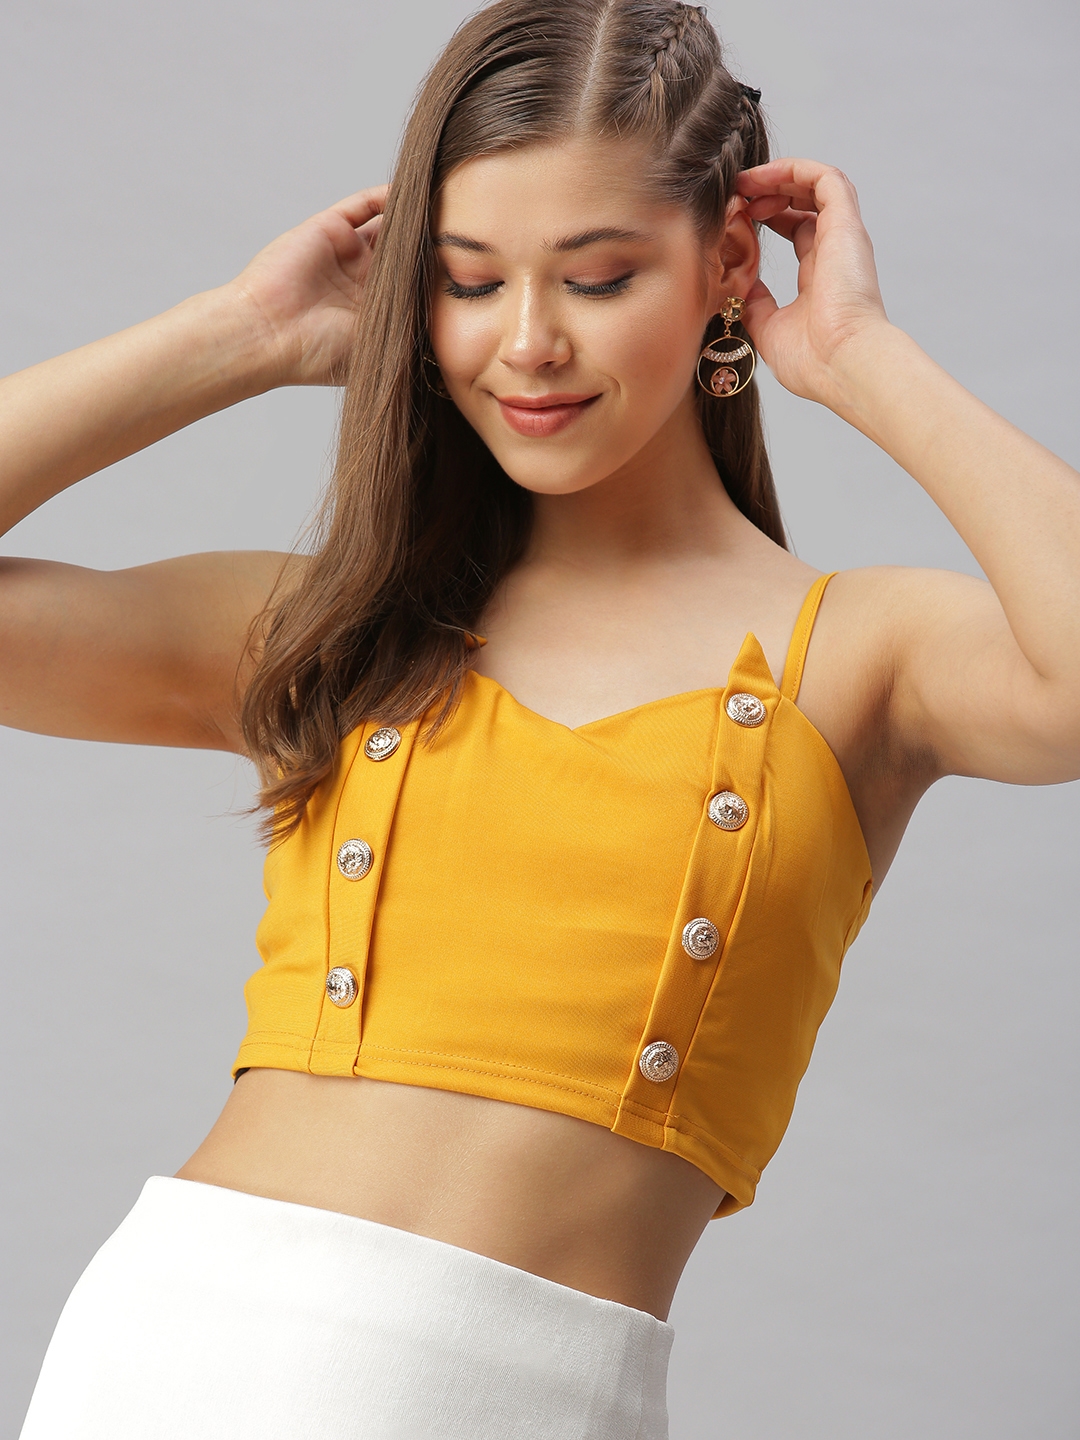 Showoff | SHOWOFF Women's Sweetheart Neck Solid Yellow Crop Top